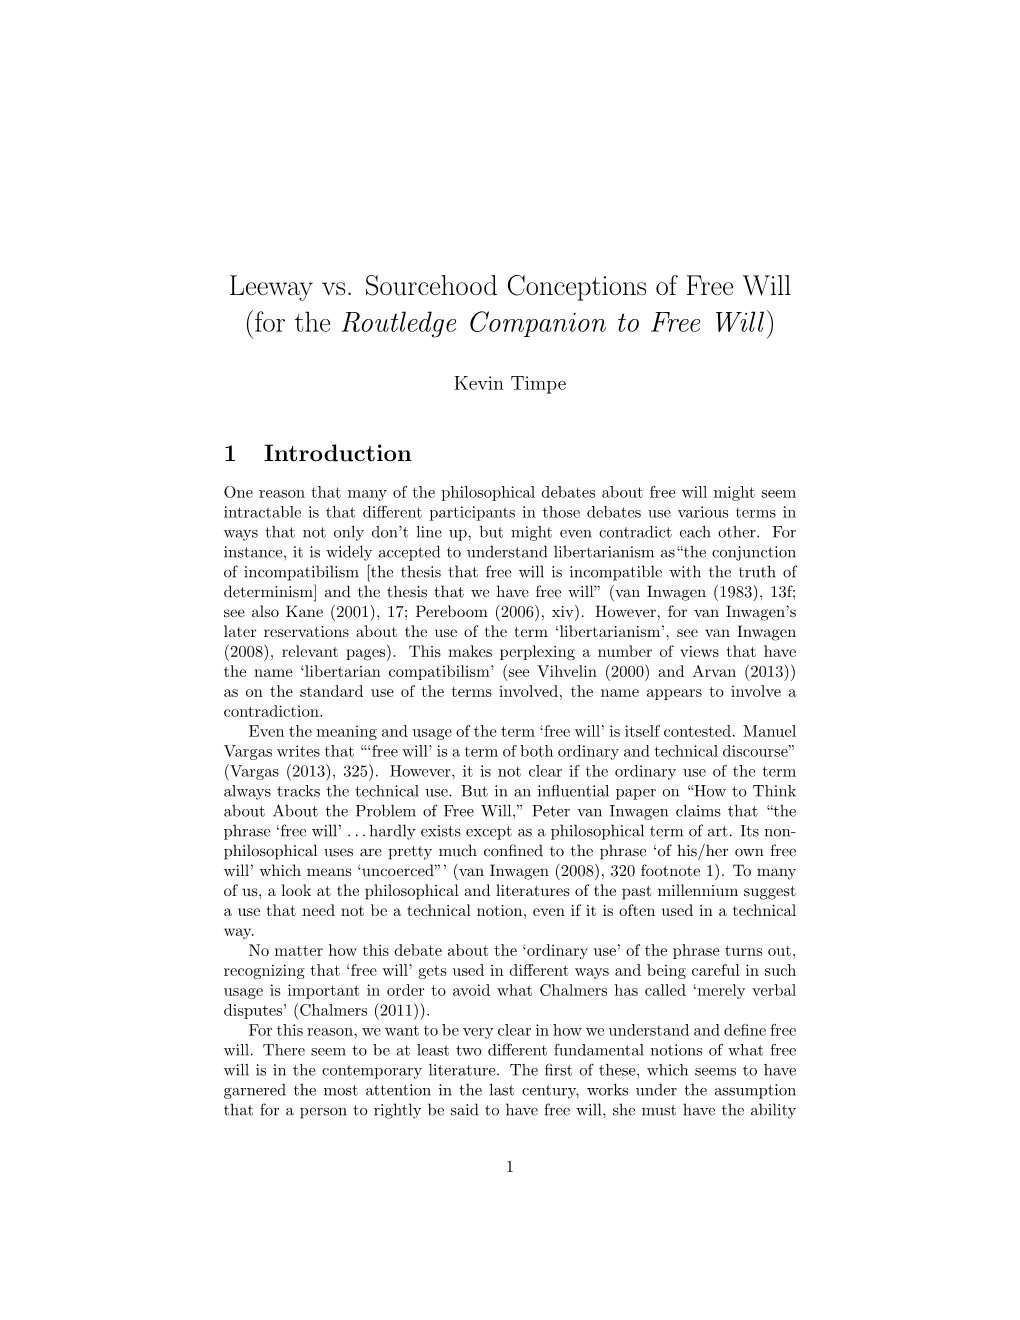 Leeway Vs. Sourcehood Conceptions of Free Will (For the Routledge Companion to Free Will)